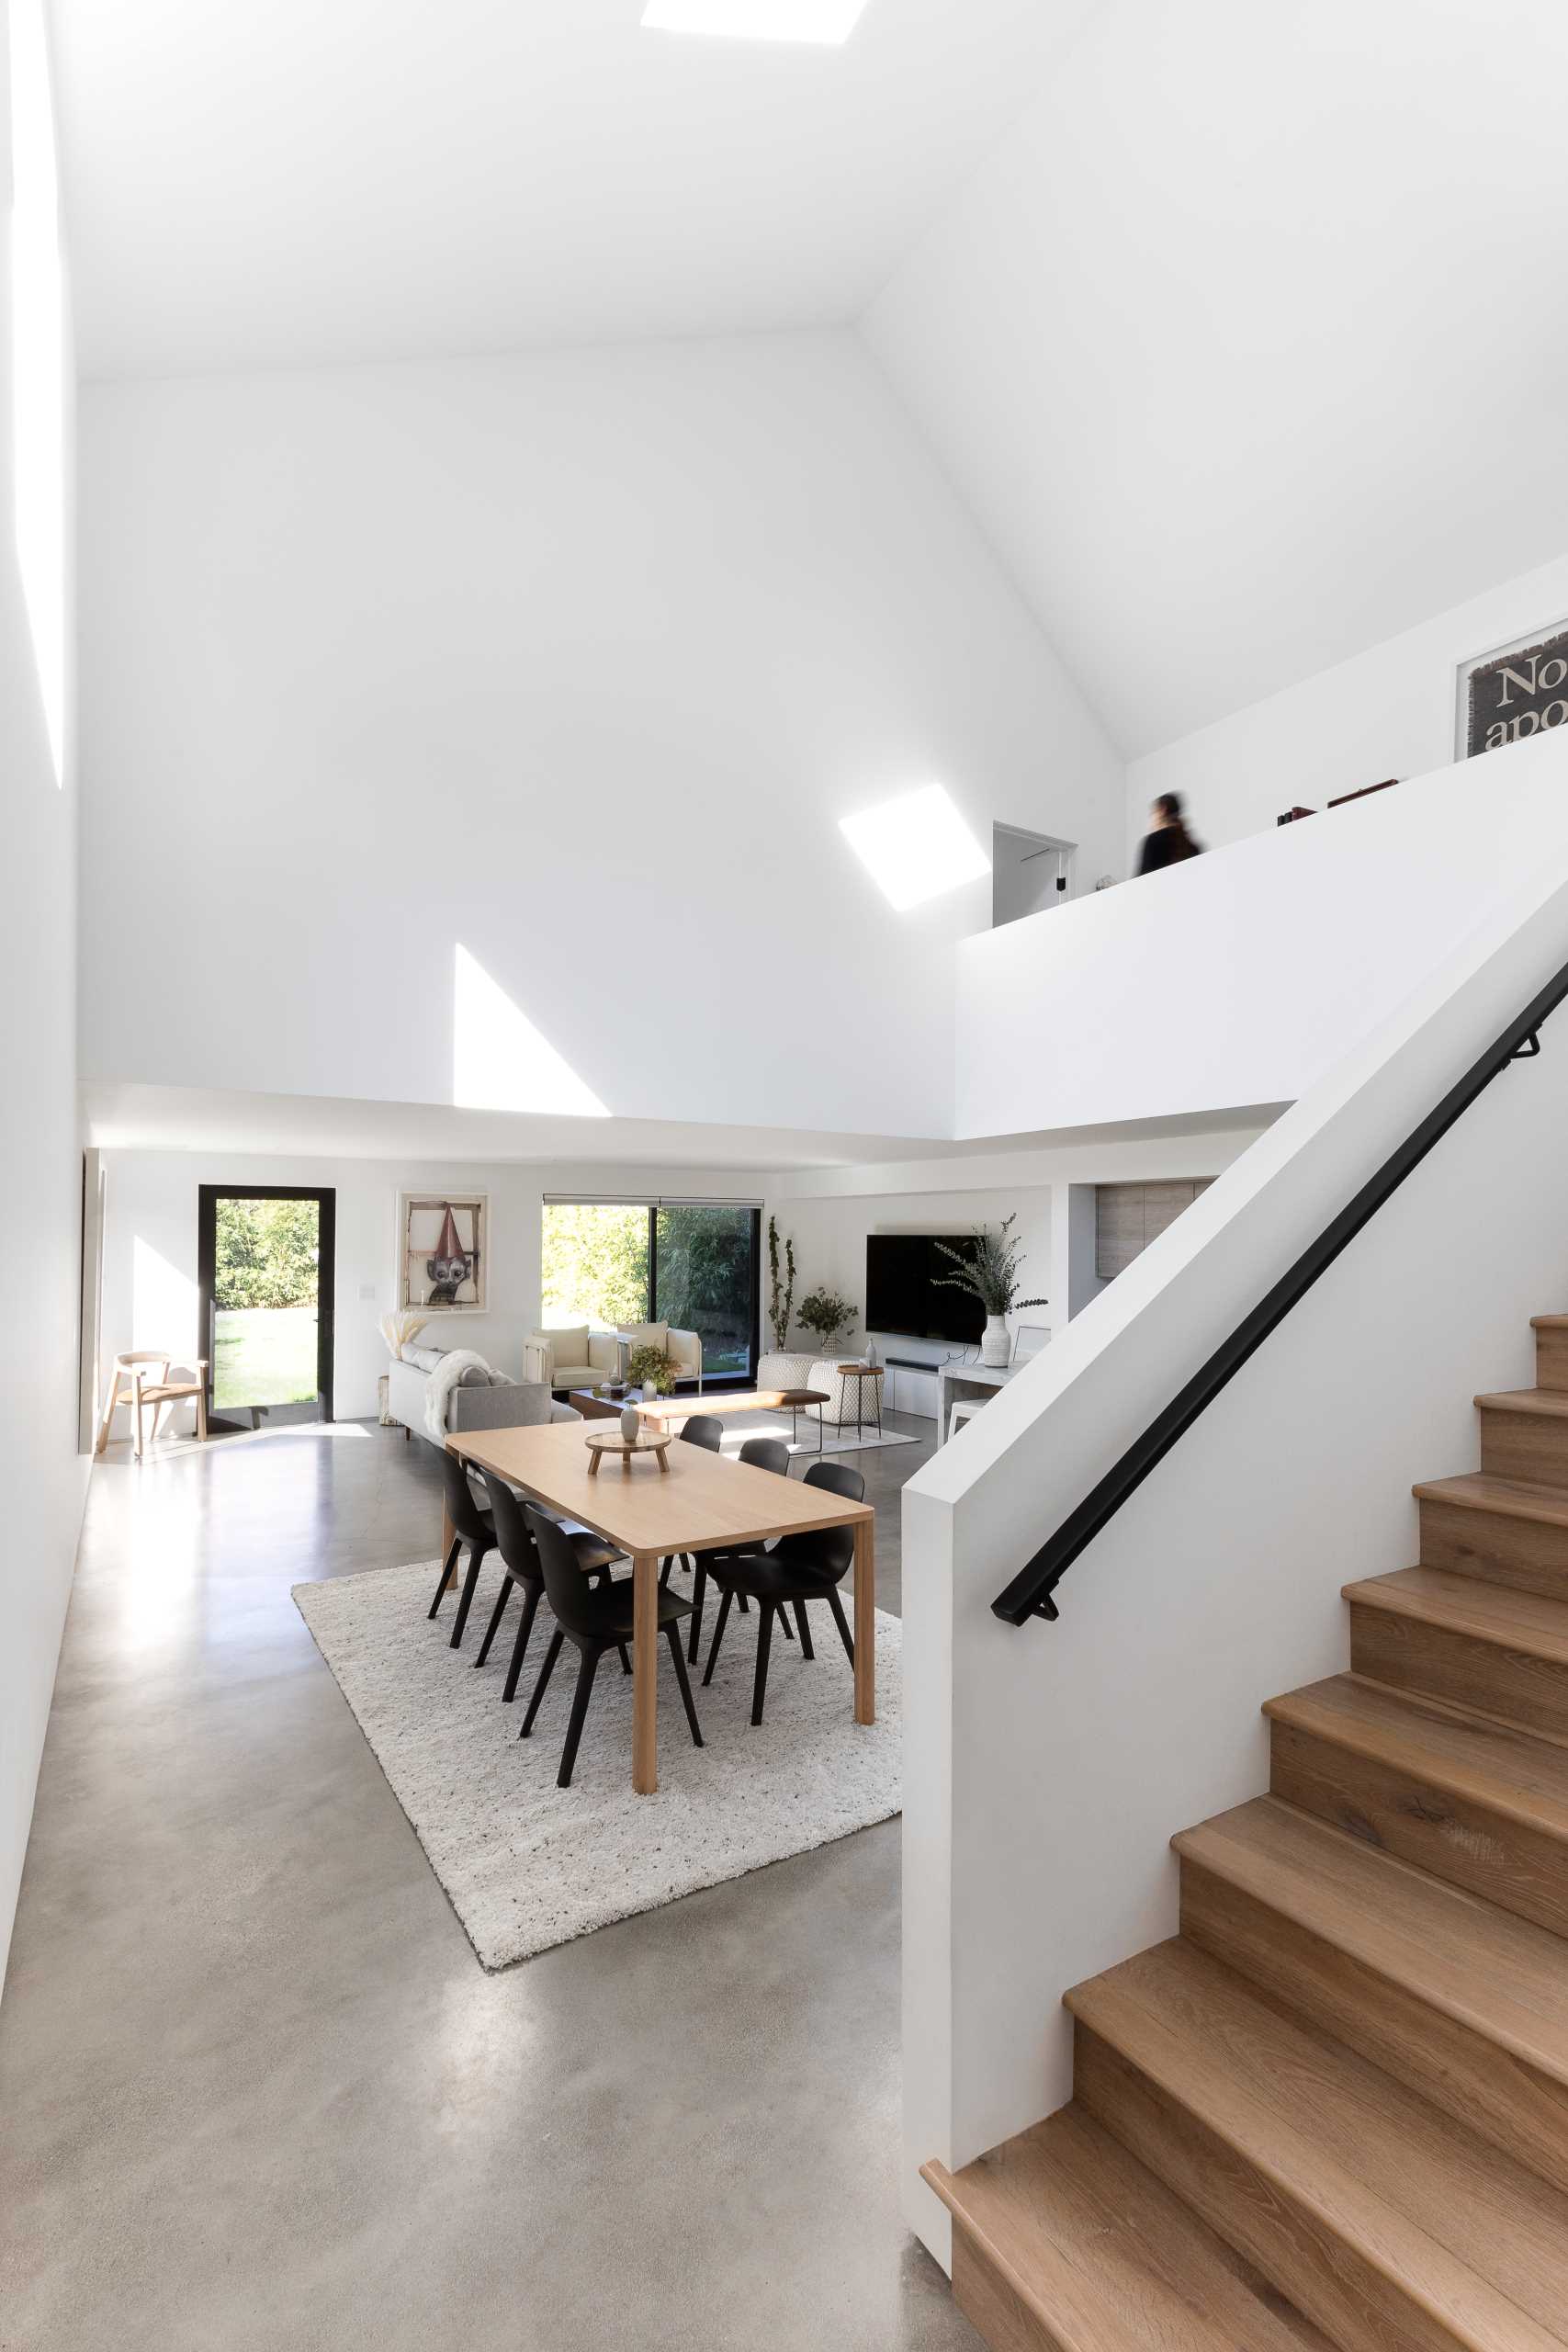 The interior of the home is a strong contrast to the black exterior with bright white walls and ceiling with concrete floors.